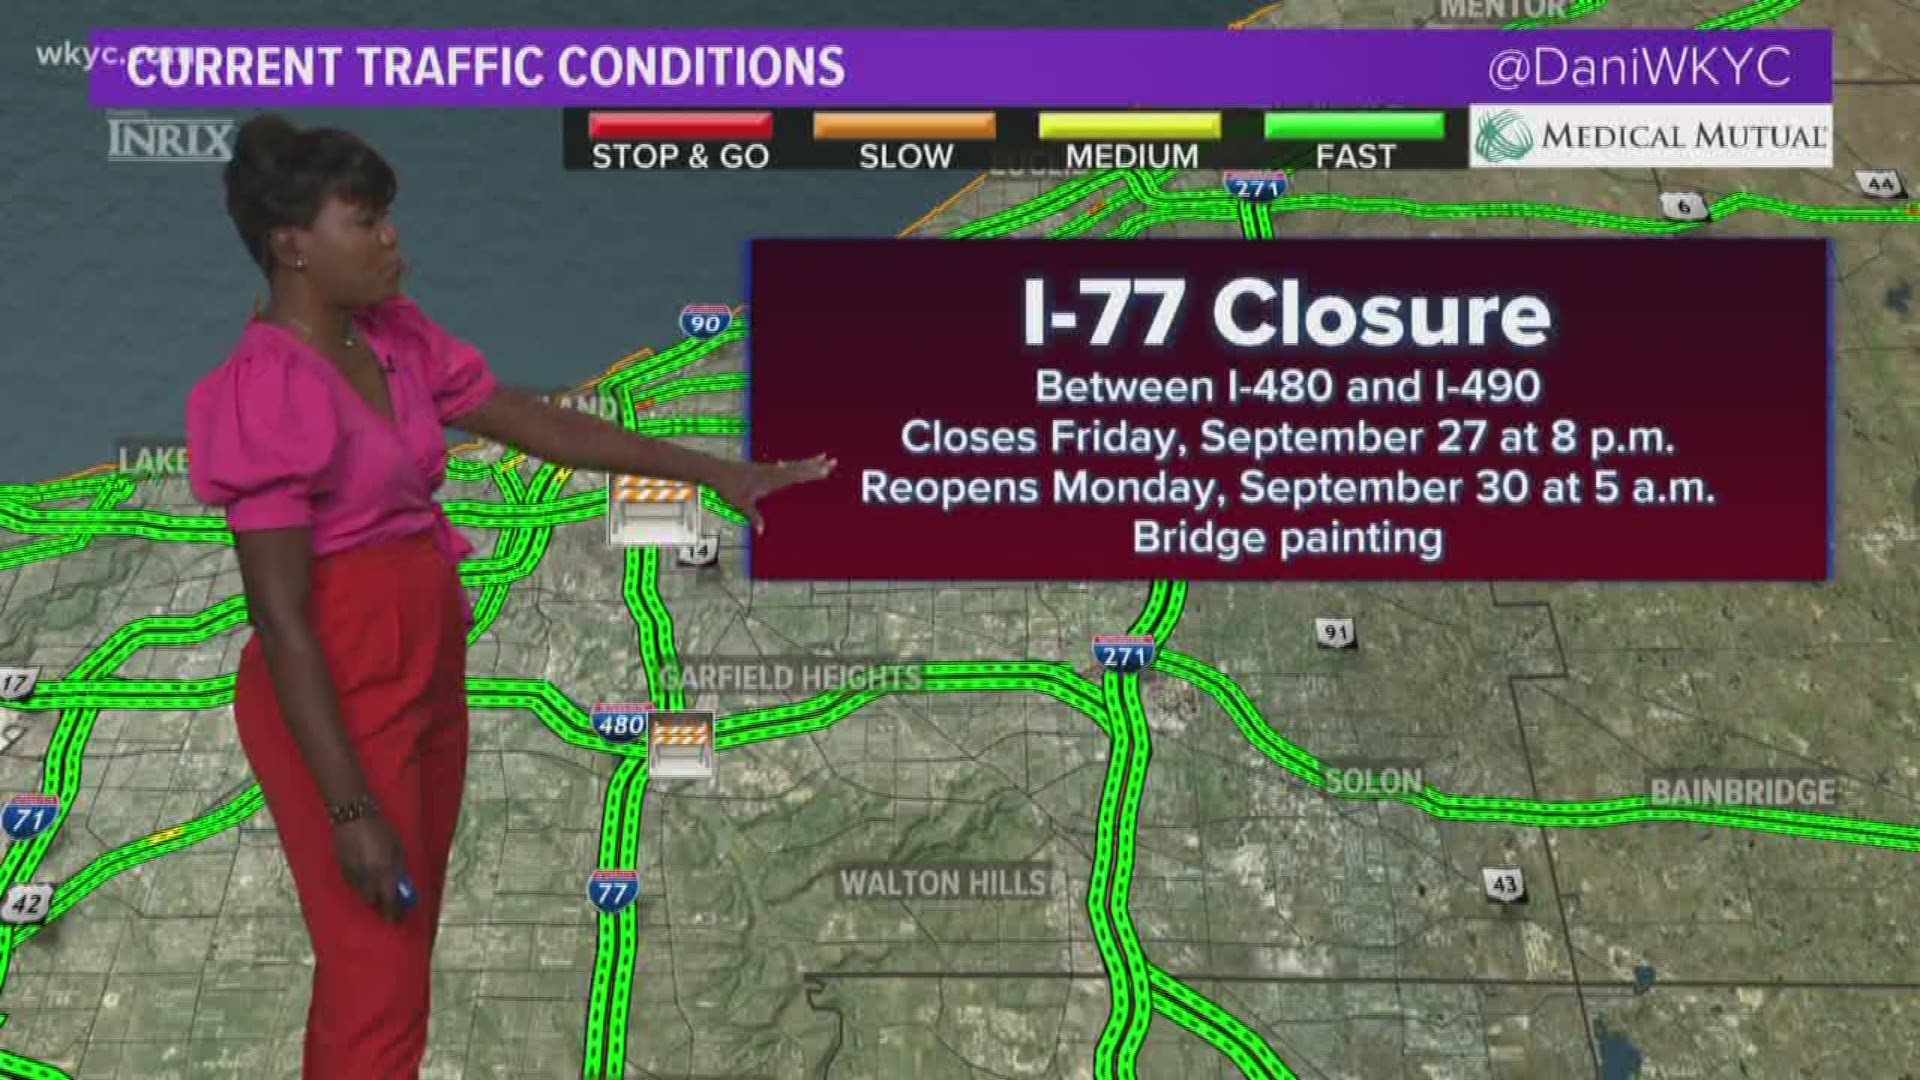 Sept. 27, 2019: Coming to Cleveland this weekend? If your drive includes I-77, be aware that the entire highway is closing all weekend between I-480 and I-490.